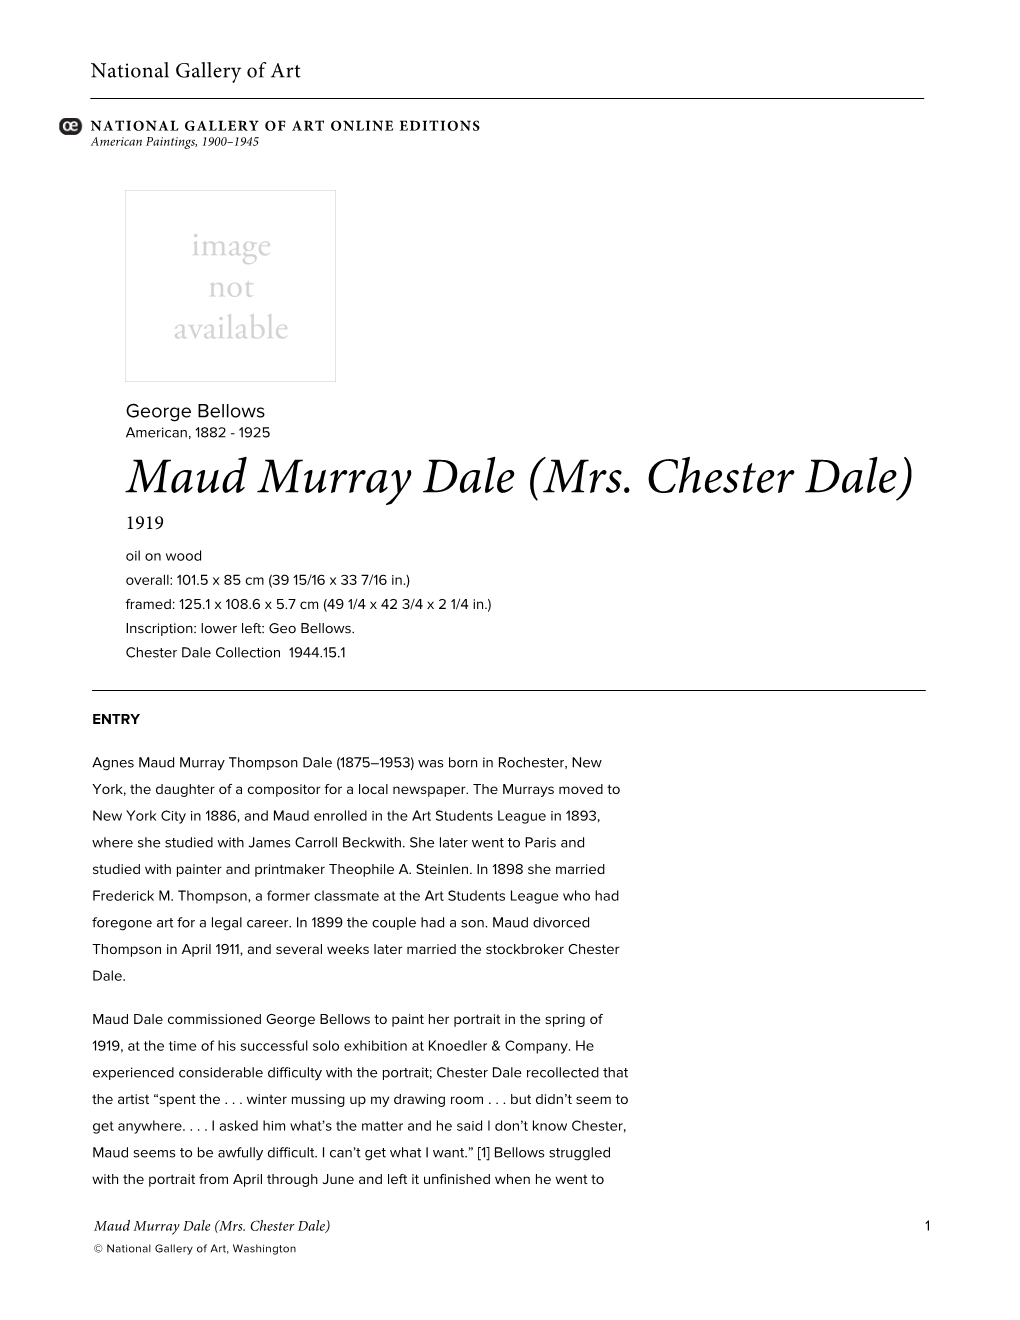 Maud Murray Dale (Mrs. Chester Dale)